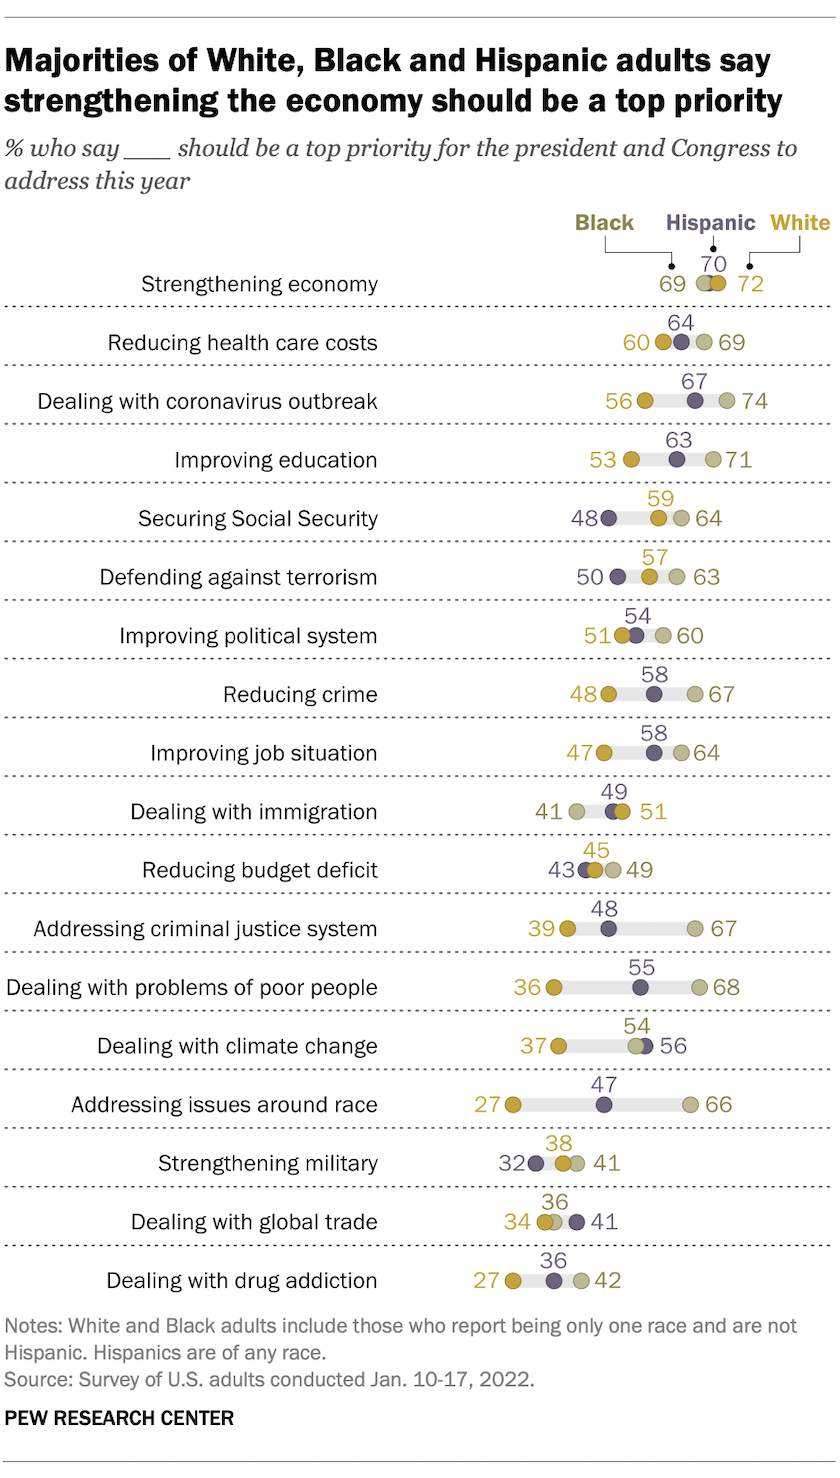 Majorities of White, Black and Hispanic adults say strengthening the economy should be a top priority